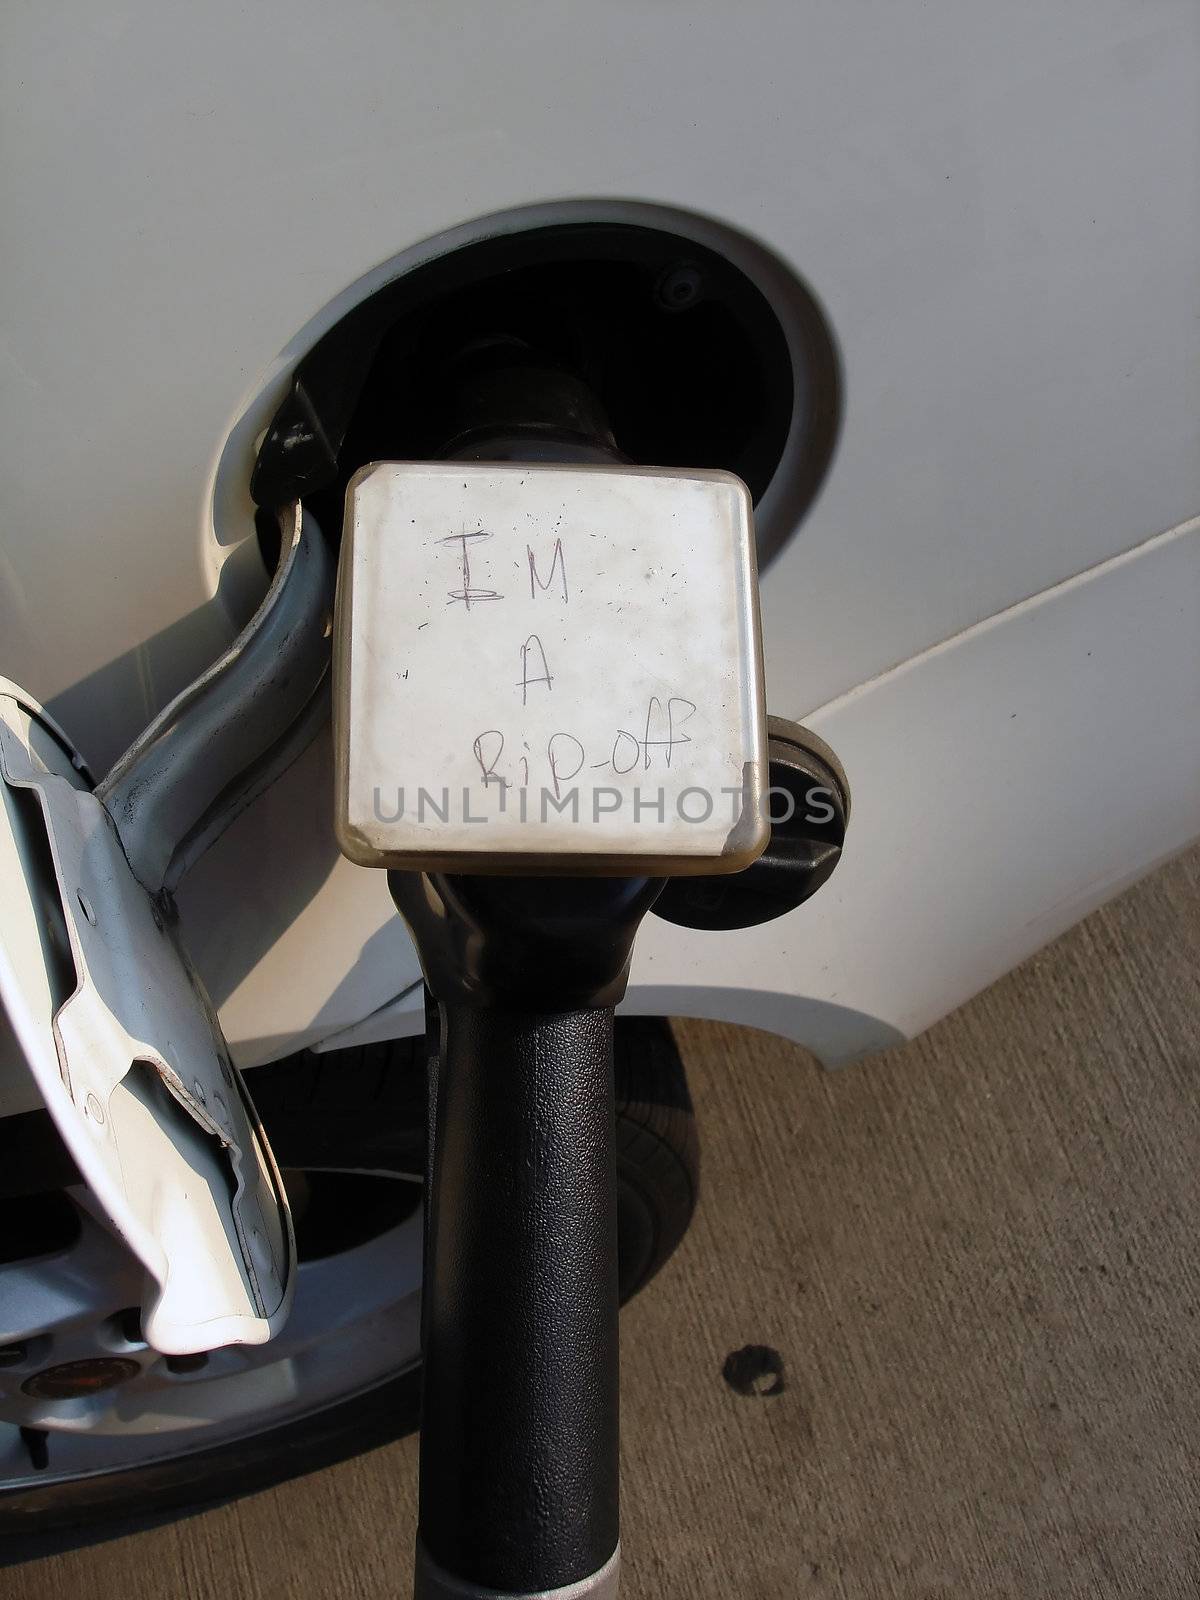 a gas pump with some writing on it